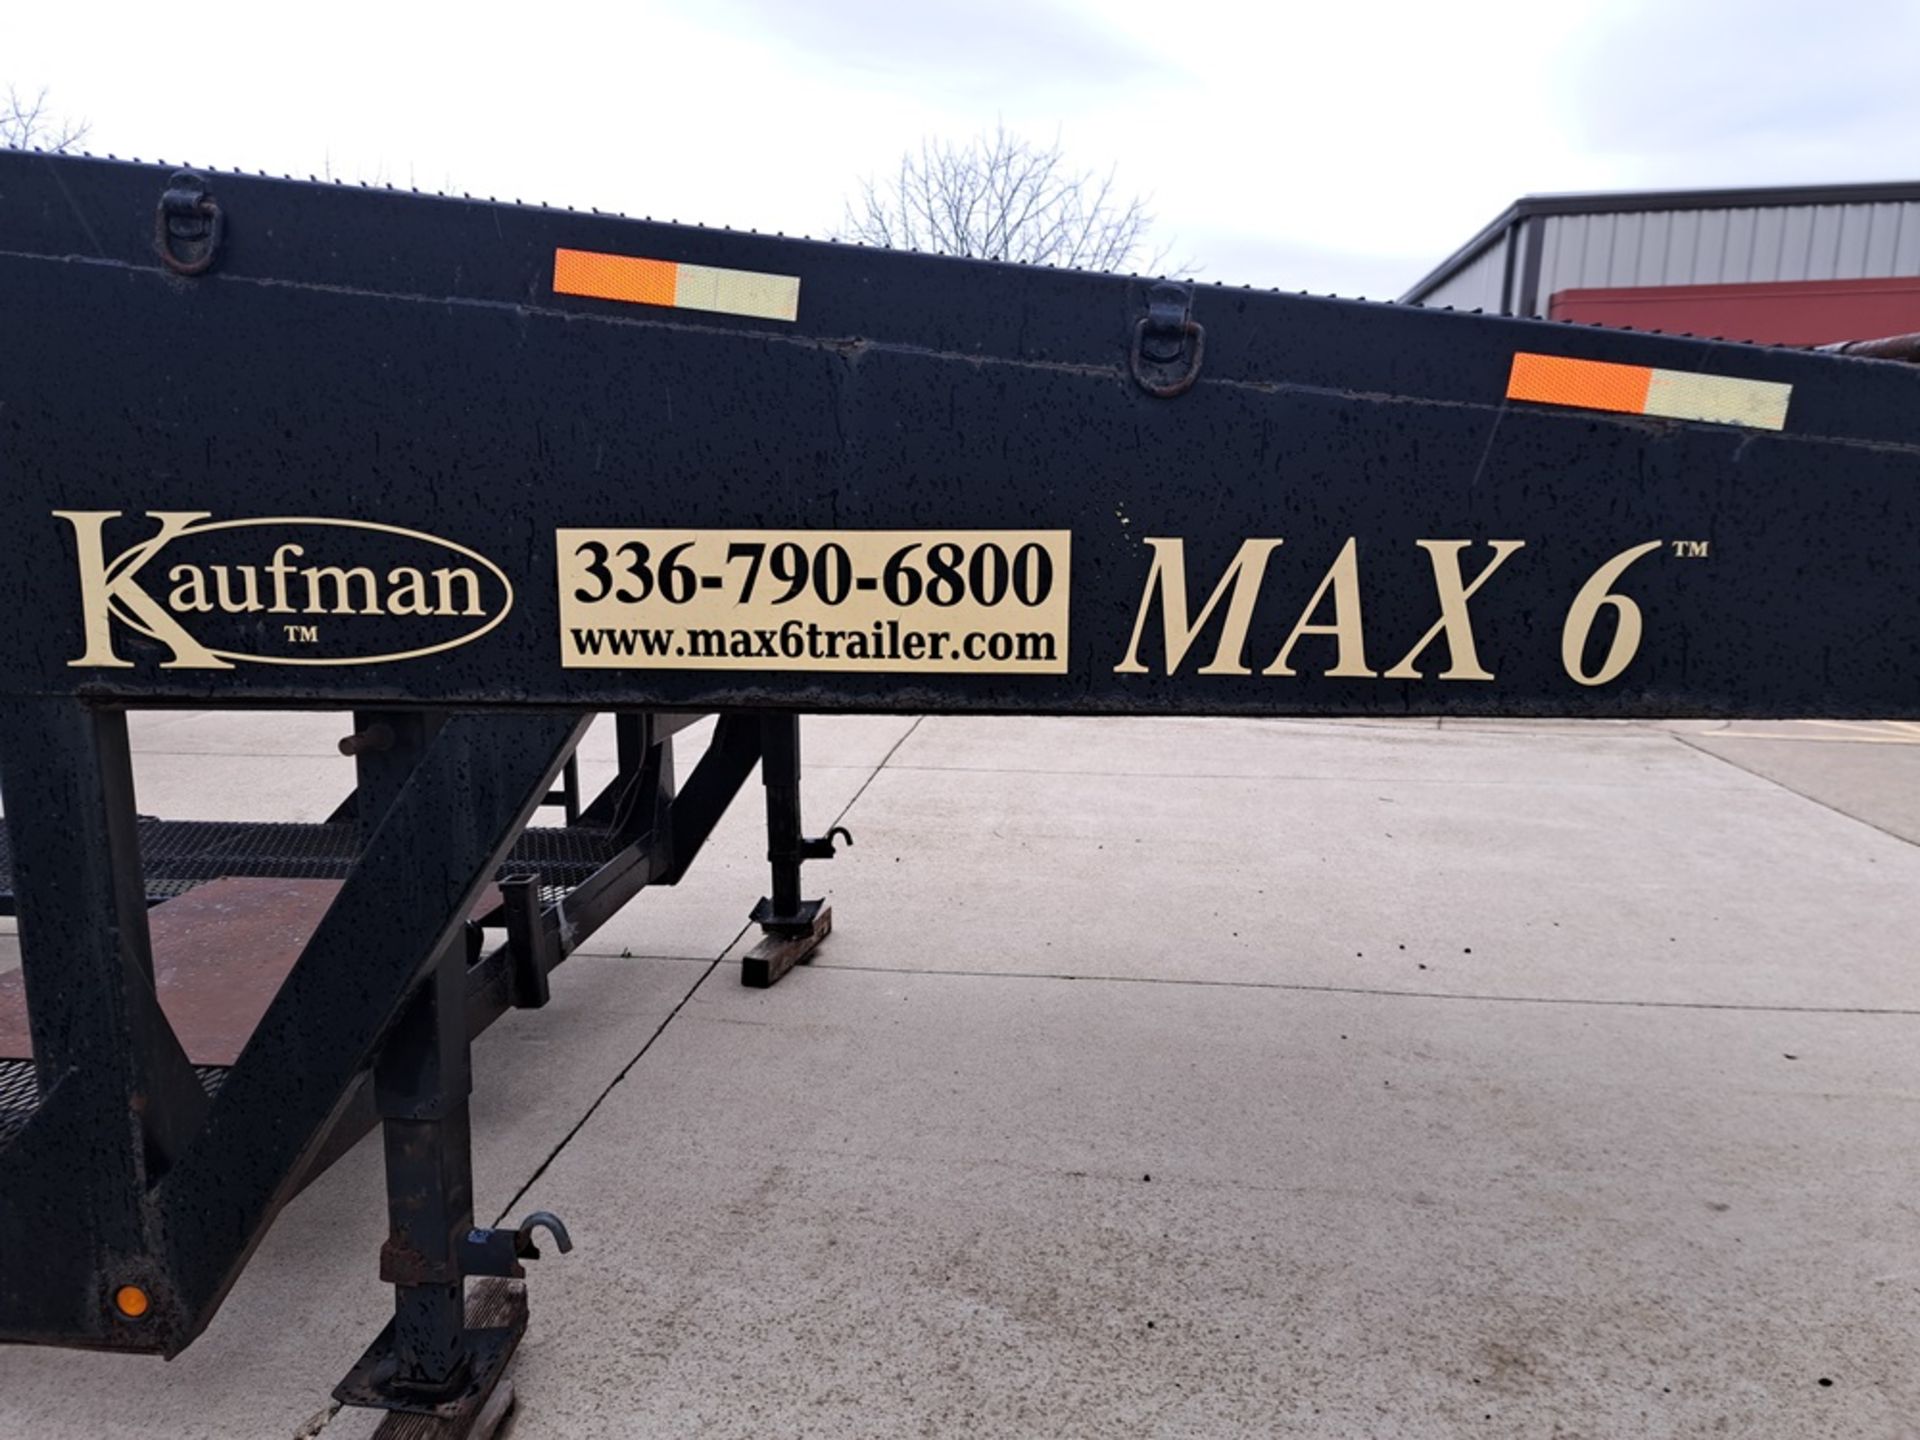 Kaufman Mdl. Max 6 Vehicle Transport Trailer, double deck, 8' wide X 54' long, 6-wheels, (2) storage - Image 3 of 12